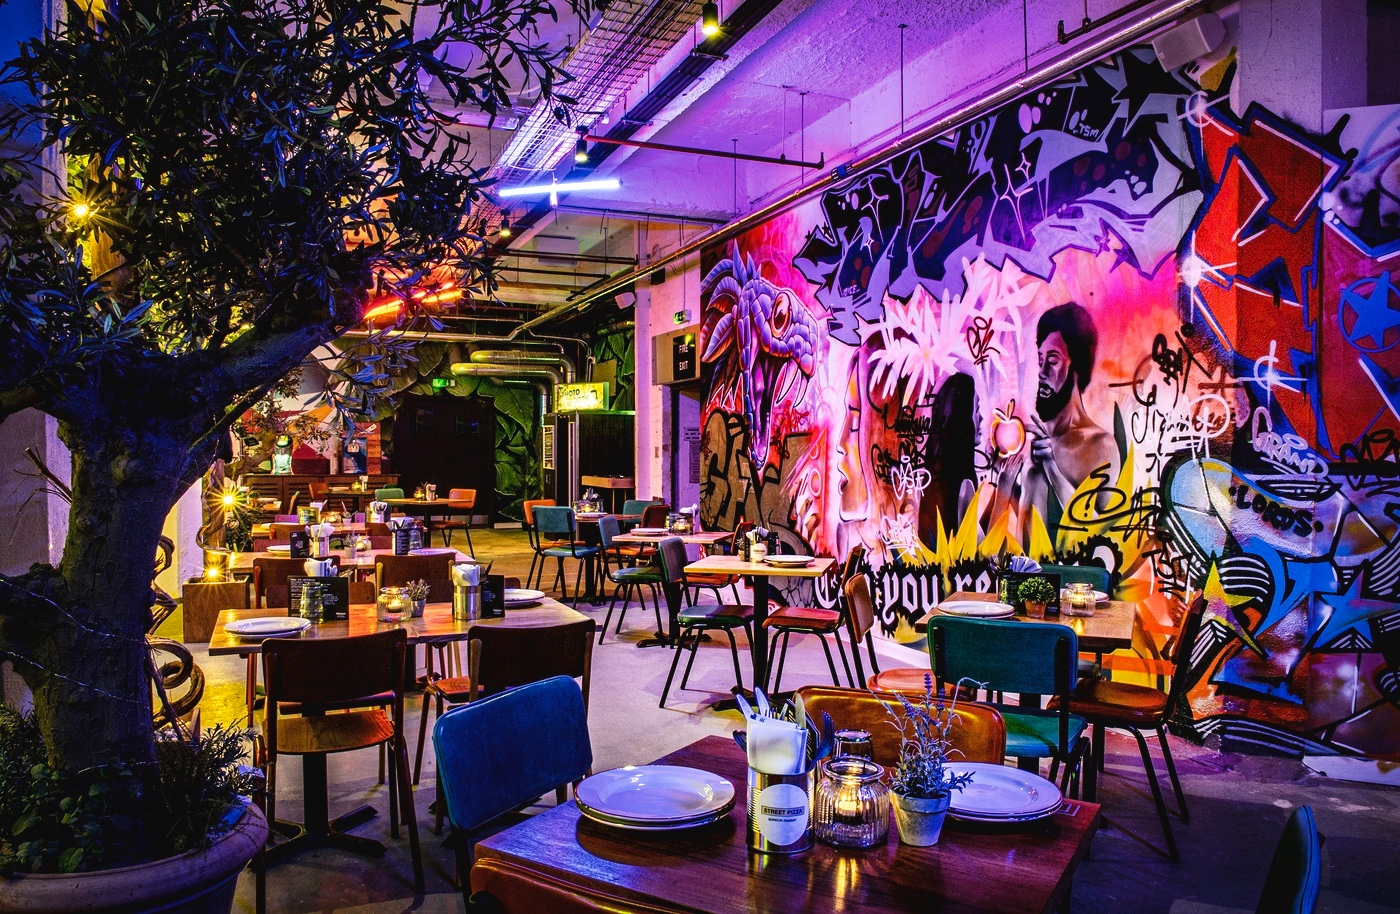 Gordeon Ramsay's Street Pizza - Southwark. Wedding Venue for modern couples and foodies.